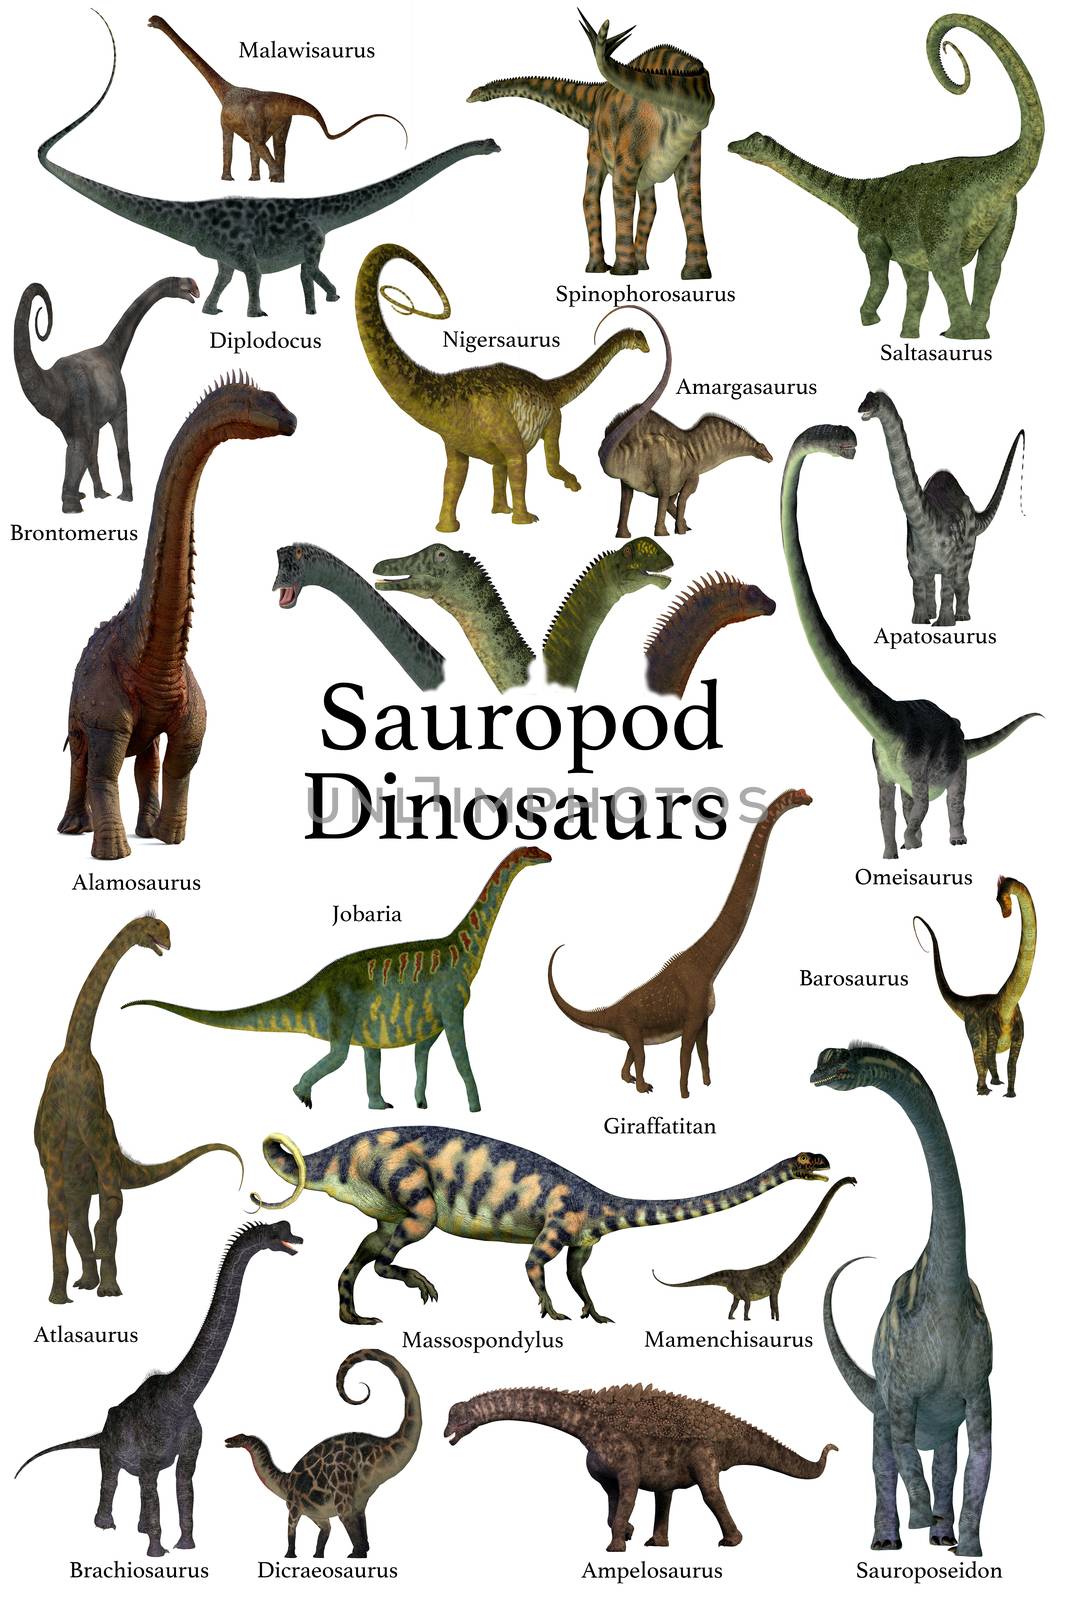 This is a collection of herbivorous sauropod dinosaurs who have long necks and tails with small heads.